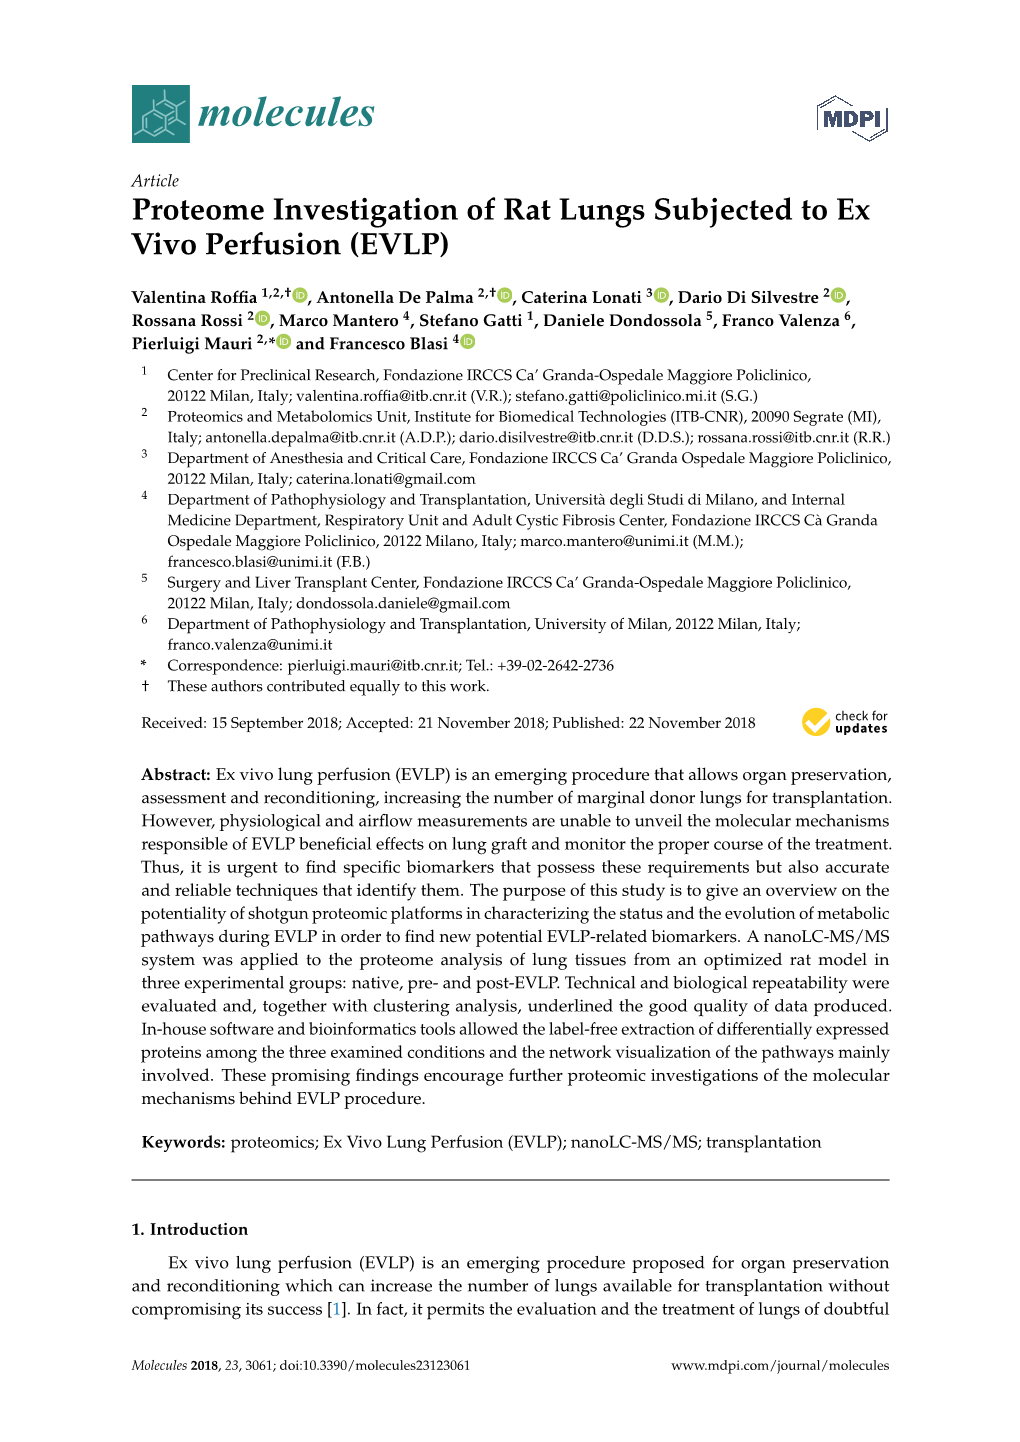 Proteome Investigation of Rat Lungs Subjected to Ex Vivo Perfusion (EVLP)